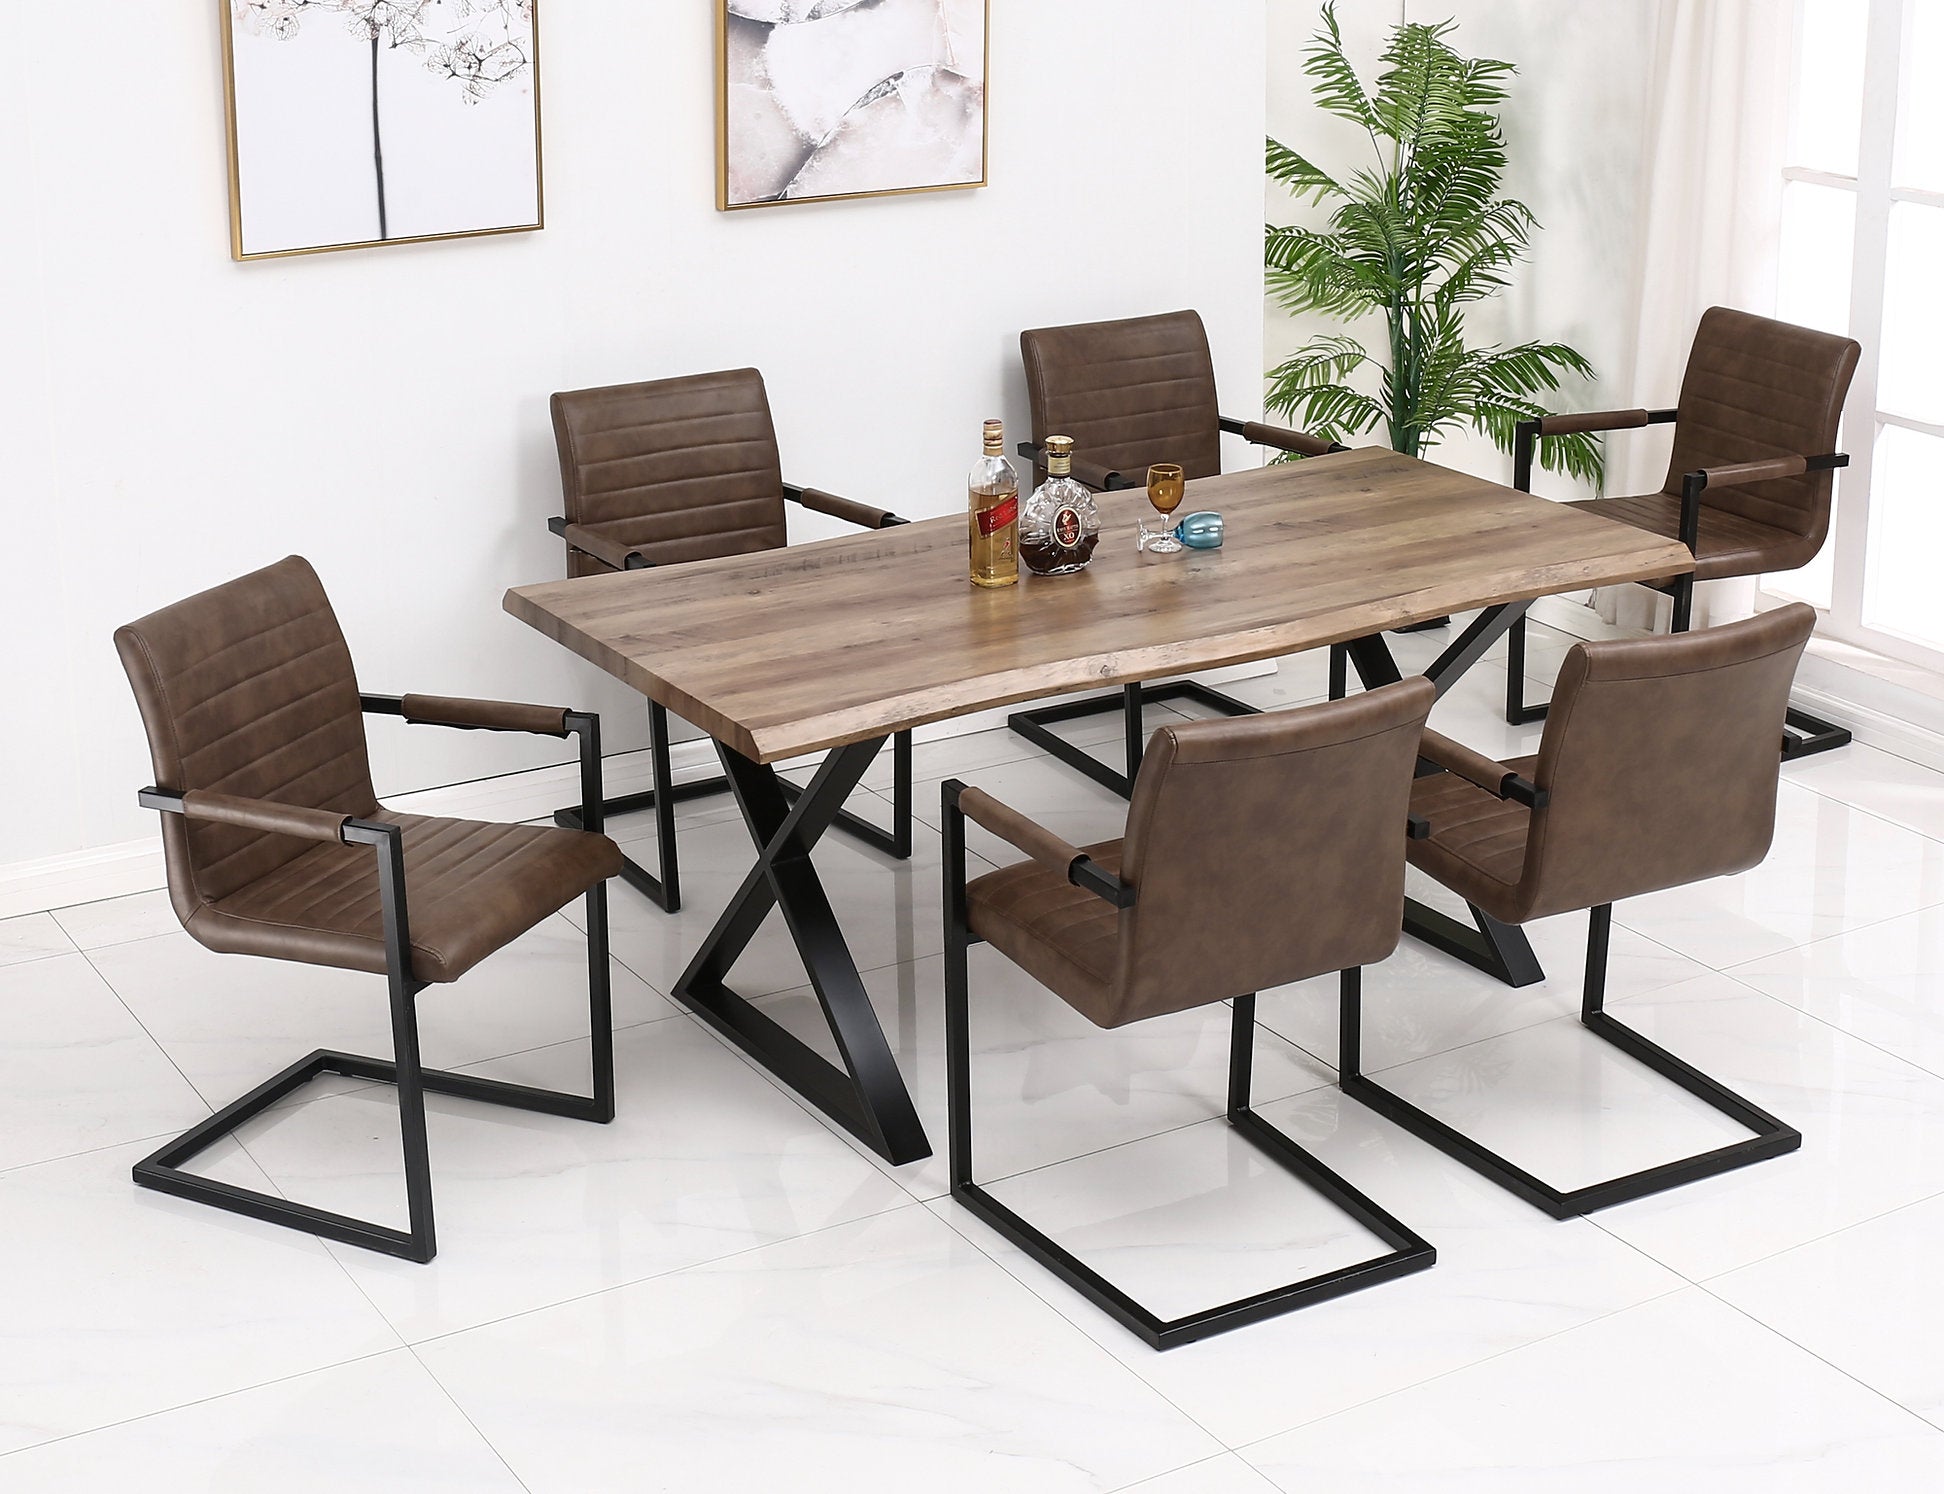 5Pc or 7Pc Dining Set - Live Edge Table with Black X Legs  T-1811 | C-1837